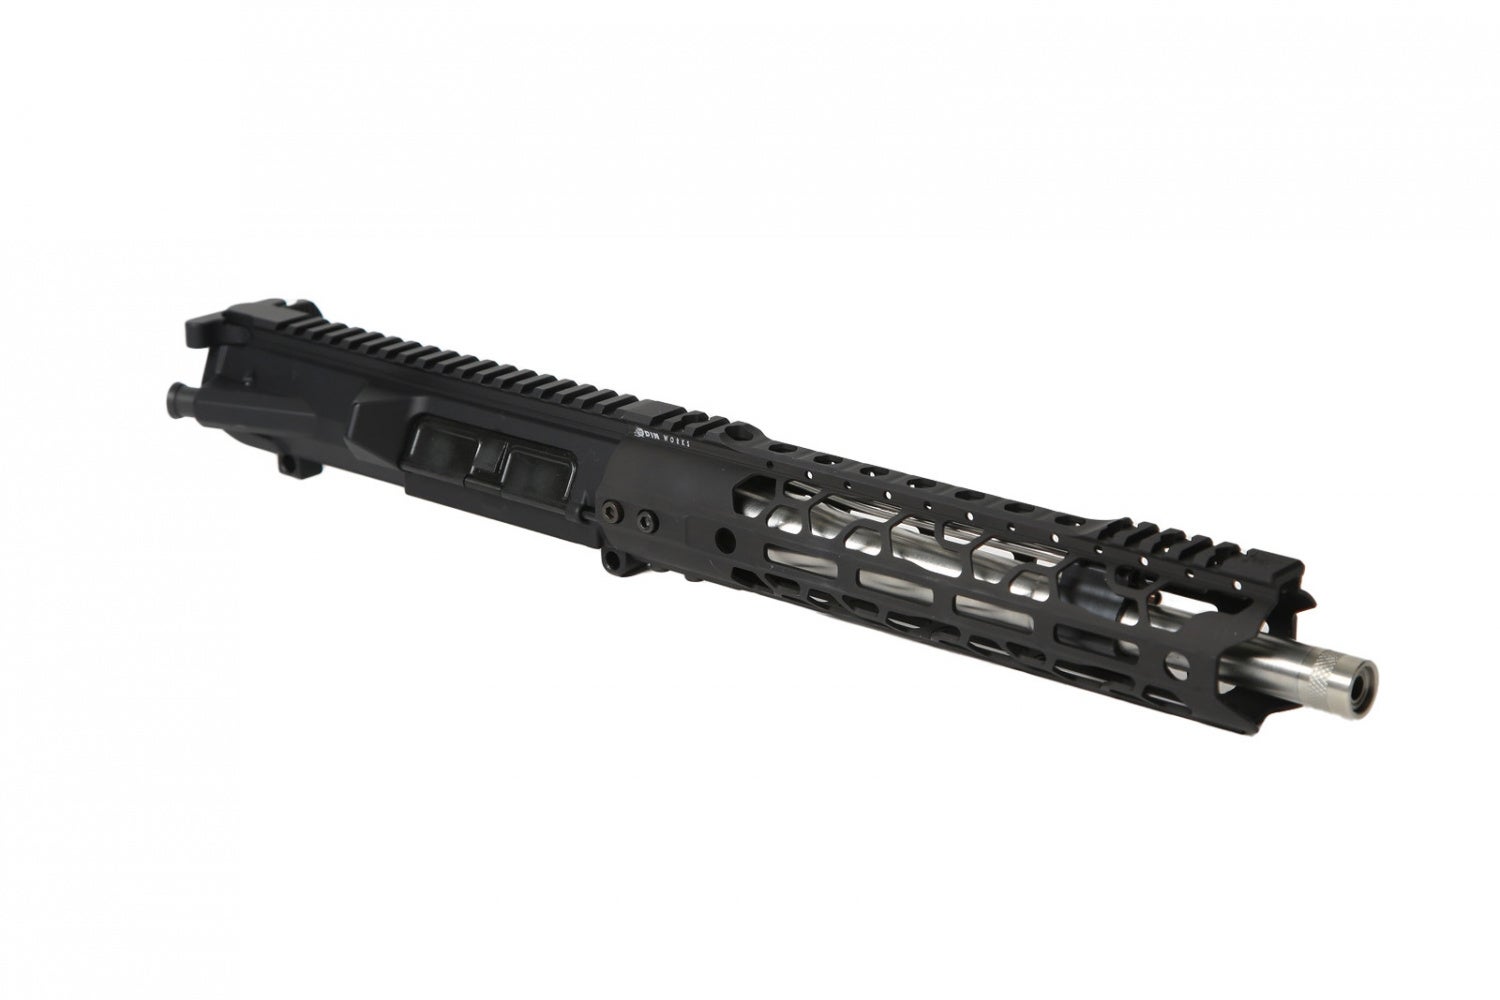 This new carbine-length upper features an 11.5" .308 barrel with a 10.5" M-LOK handguard.